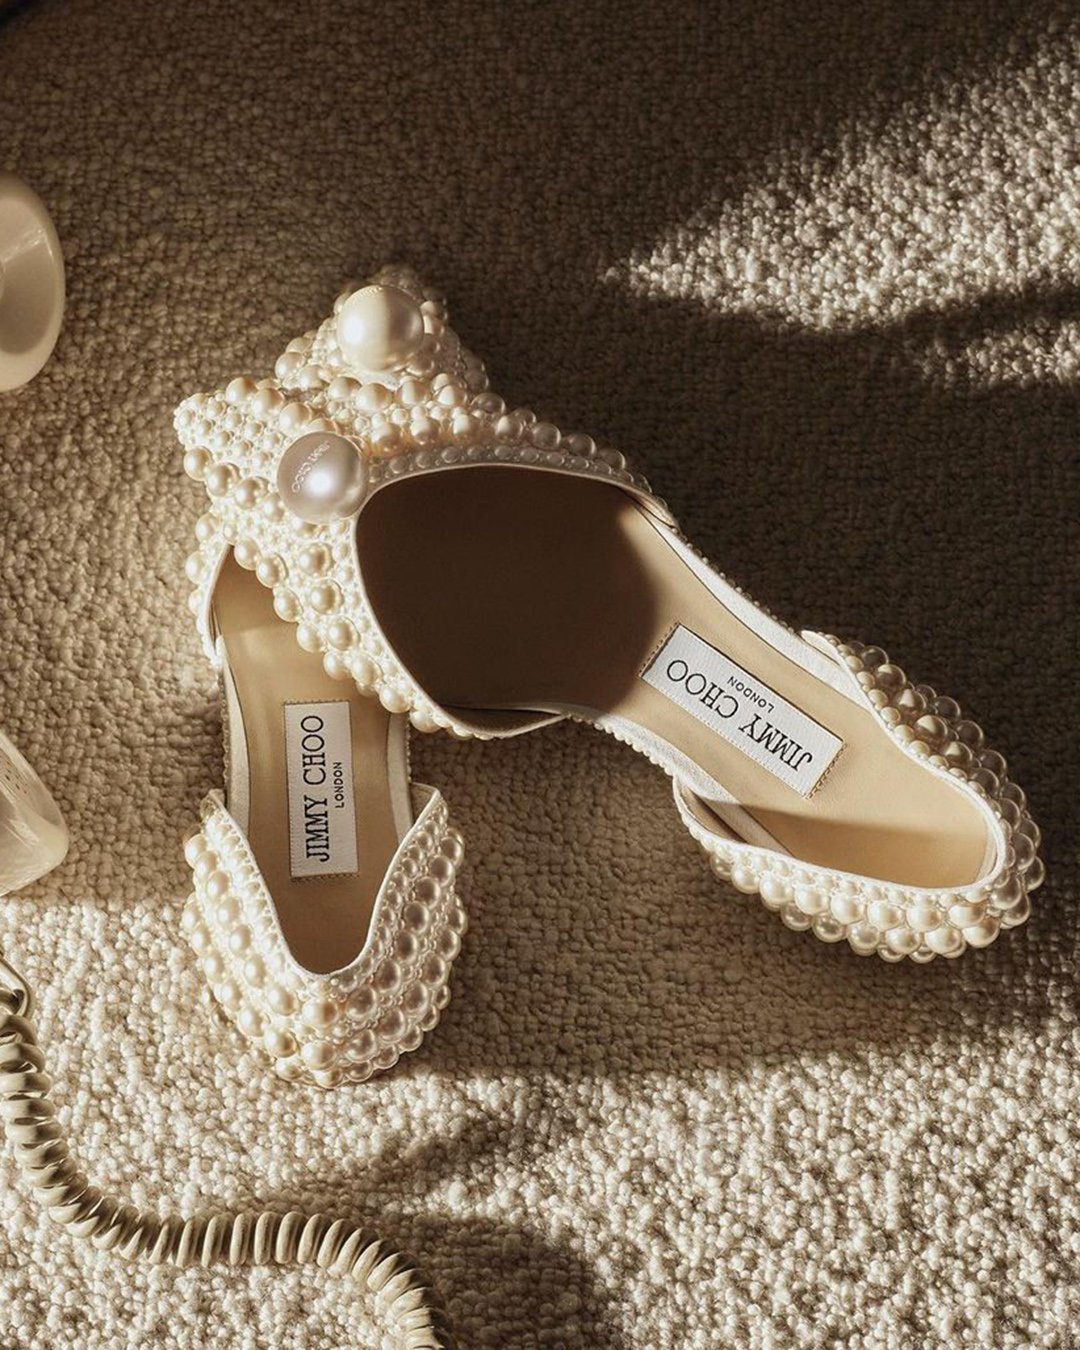 comfortable wedding shoes flats with pearls jimmy choo